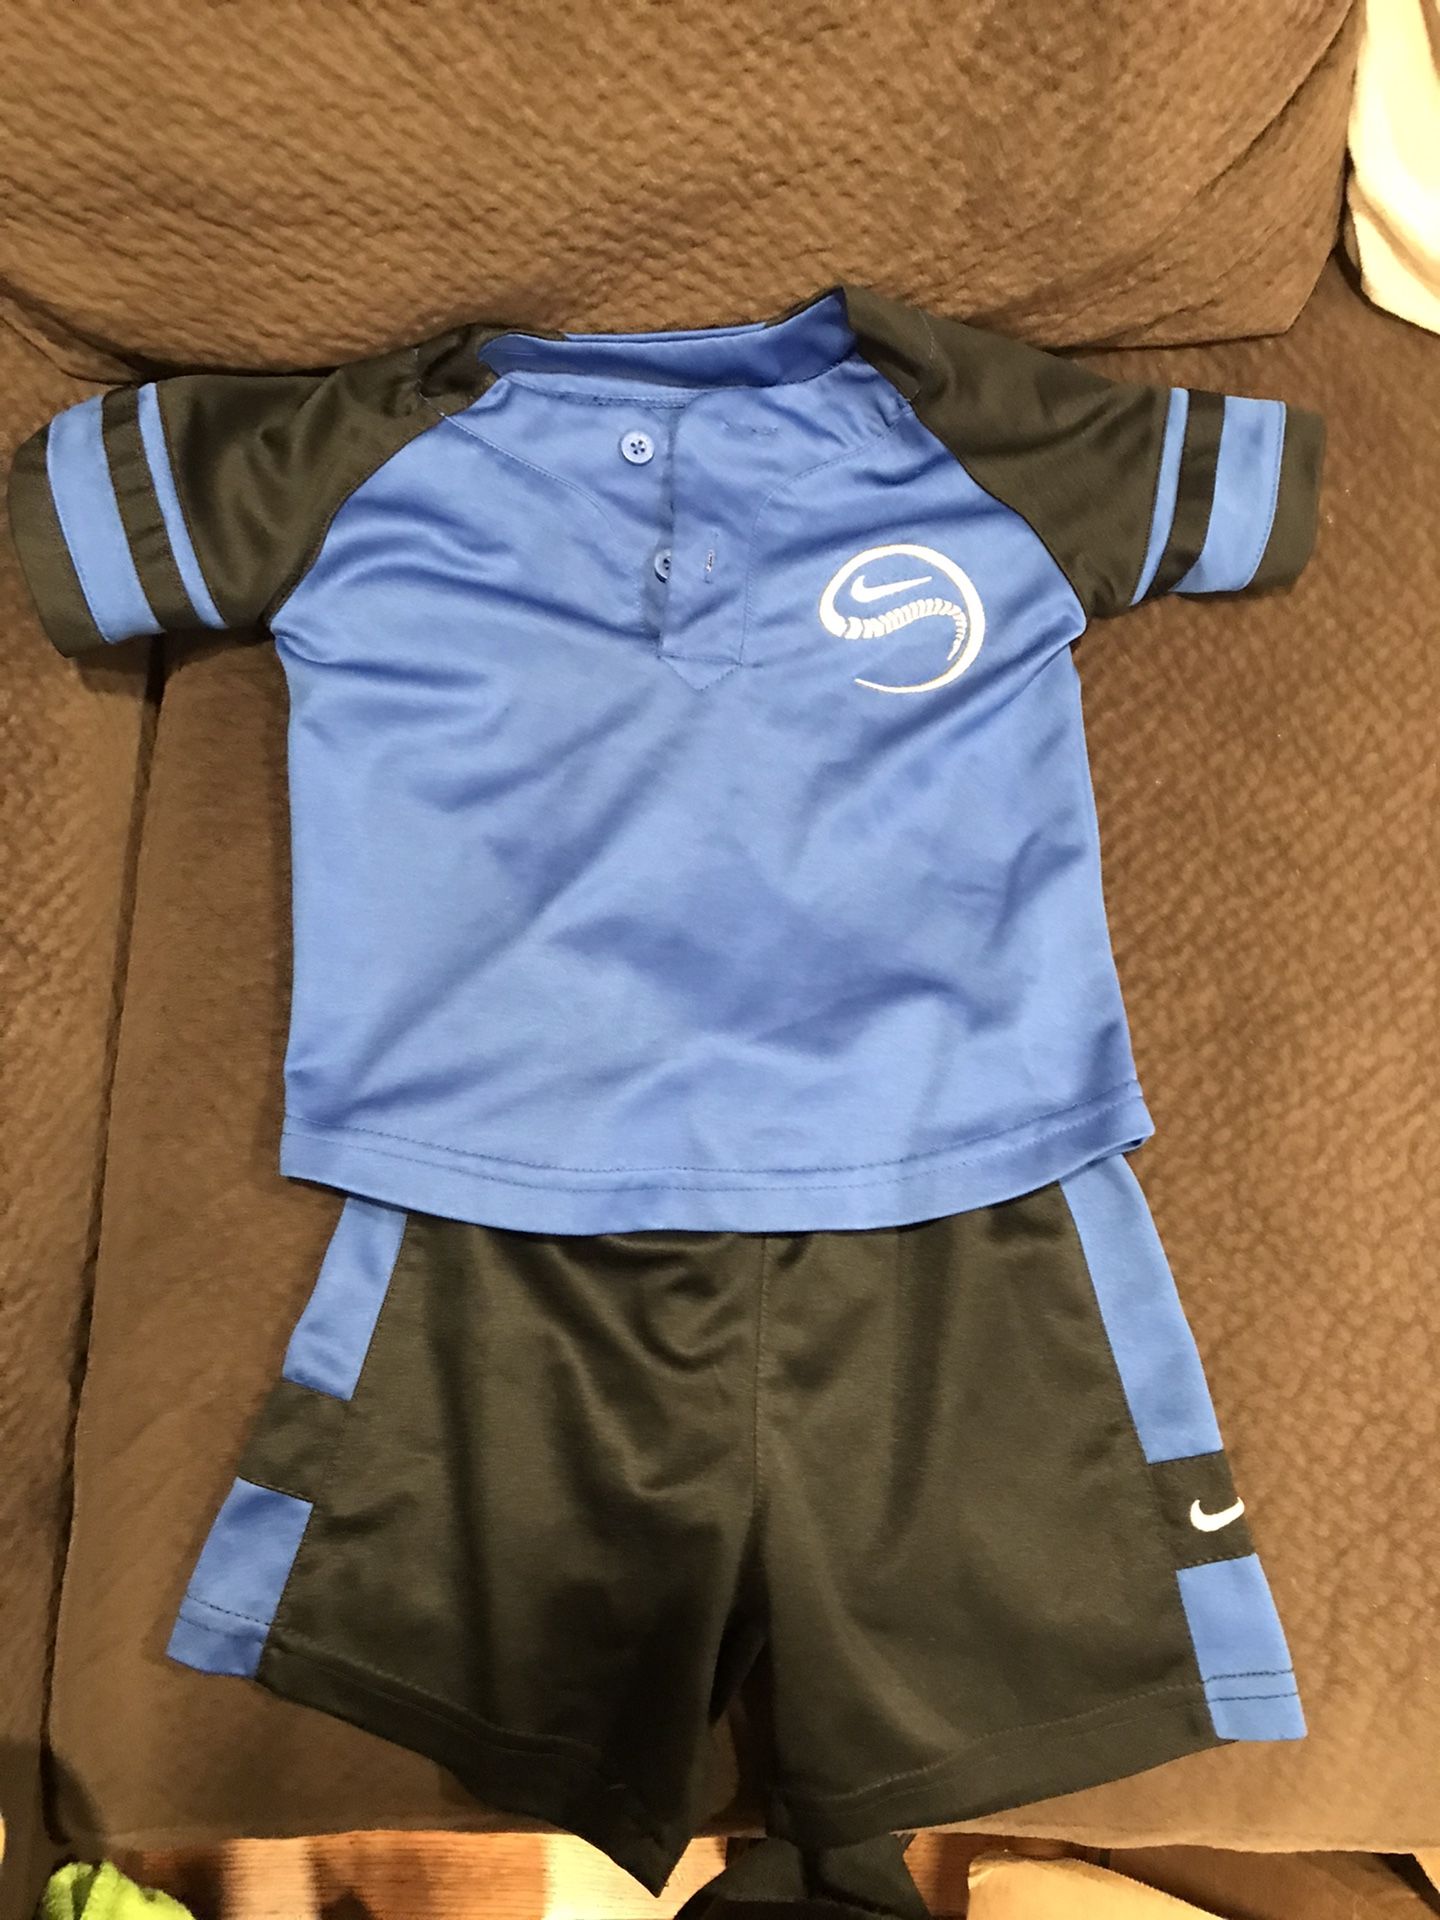 Boys clothes 2t-4t great condition